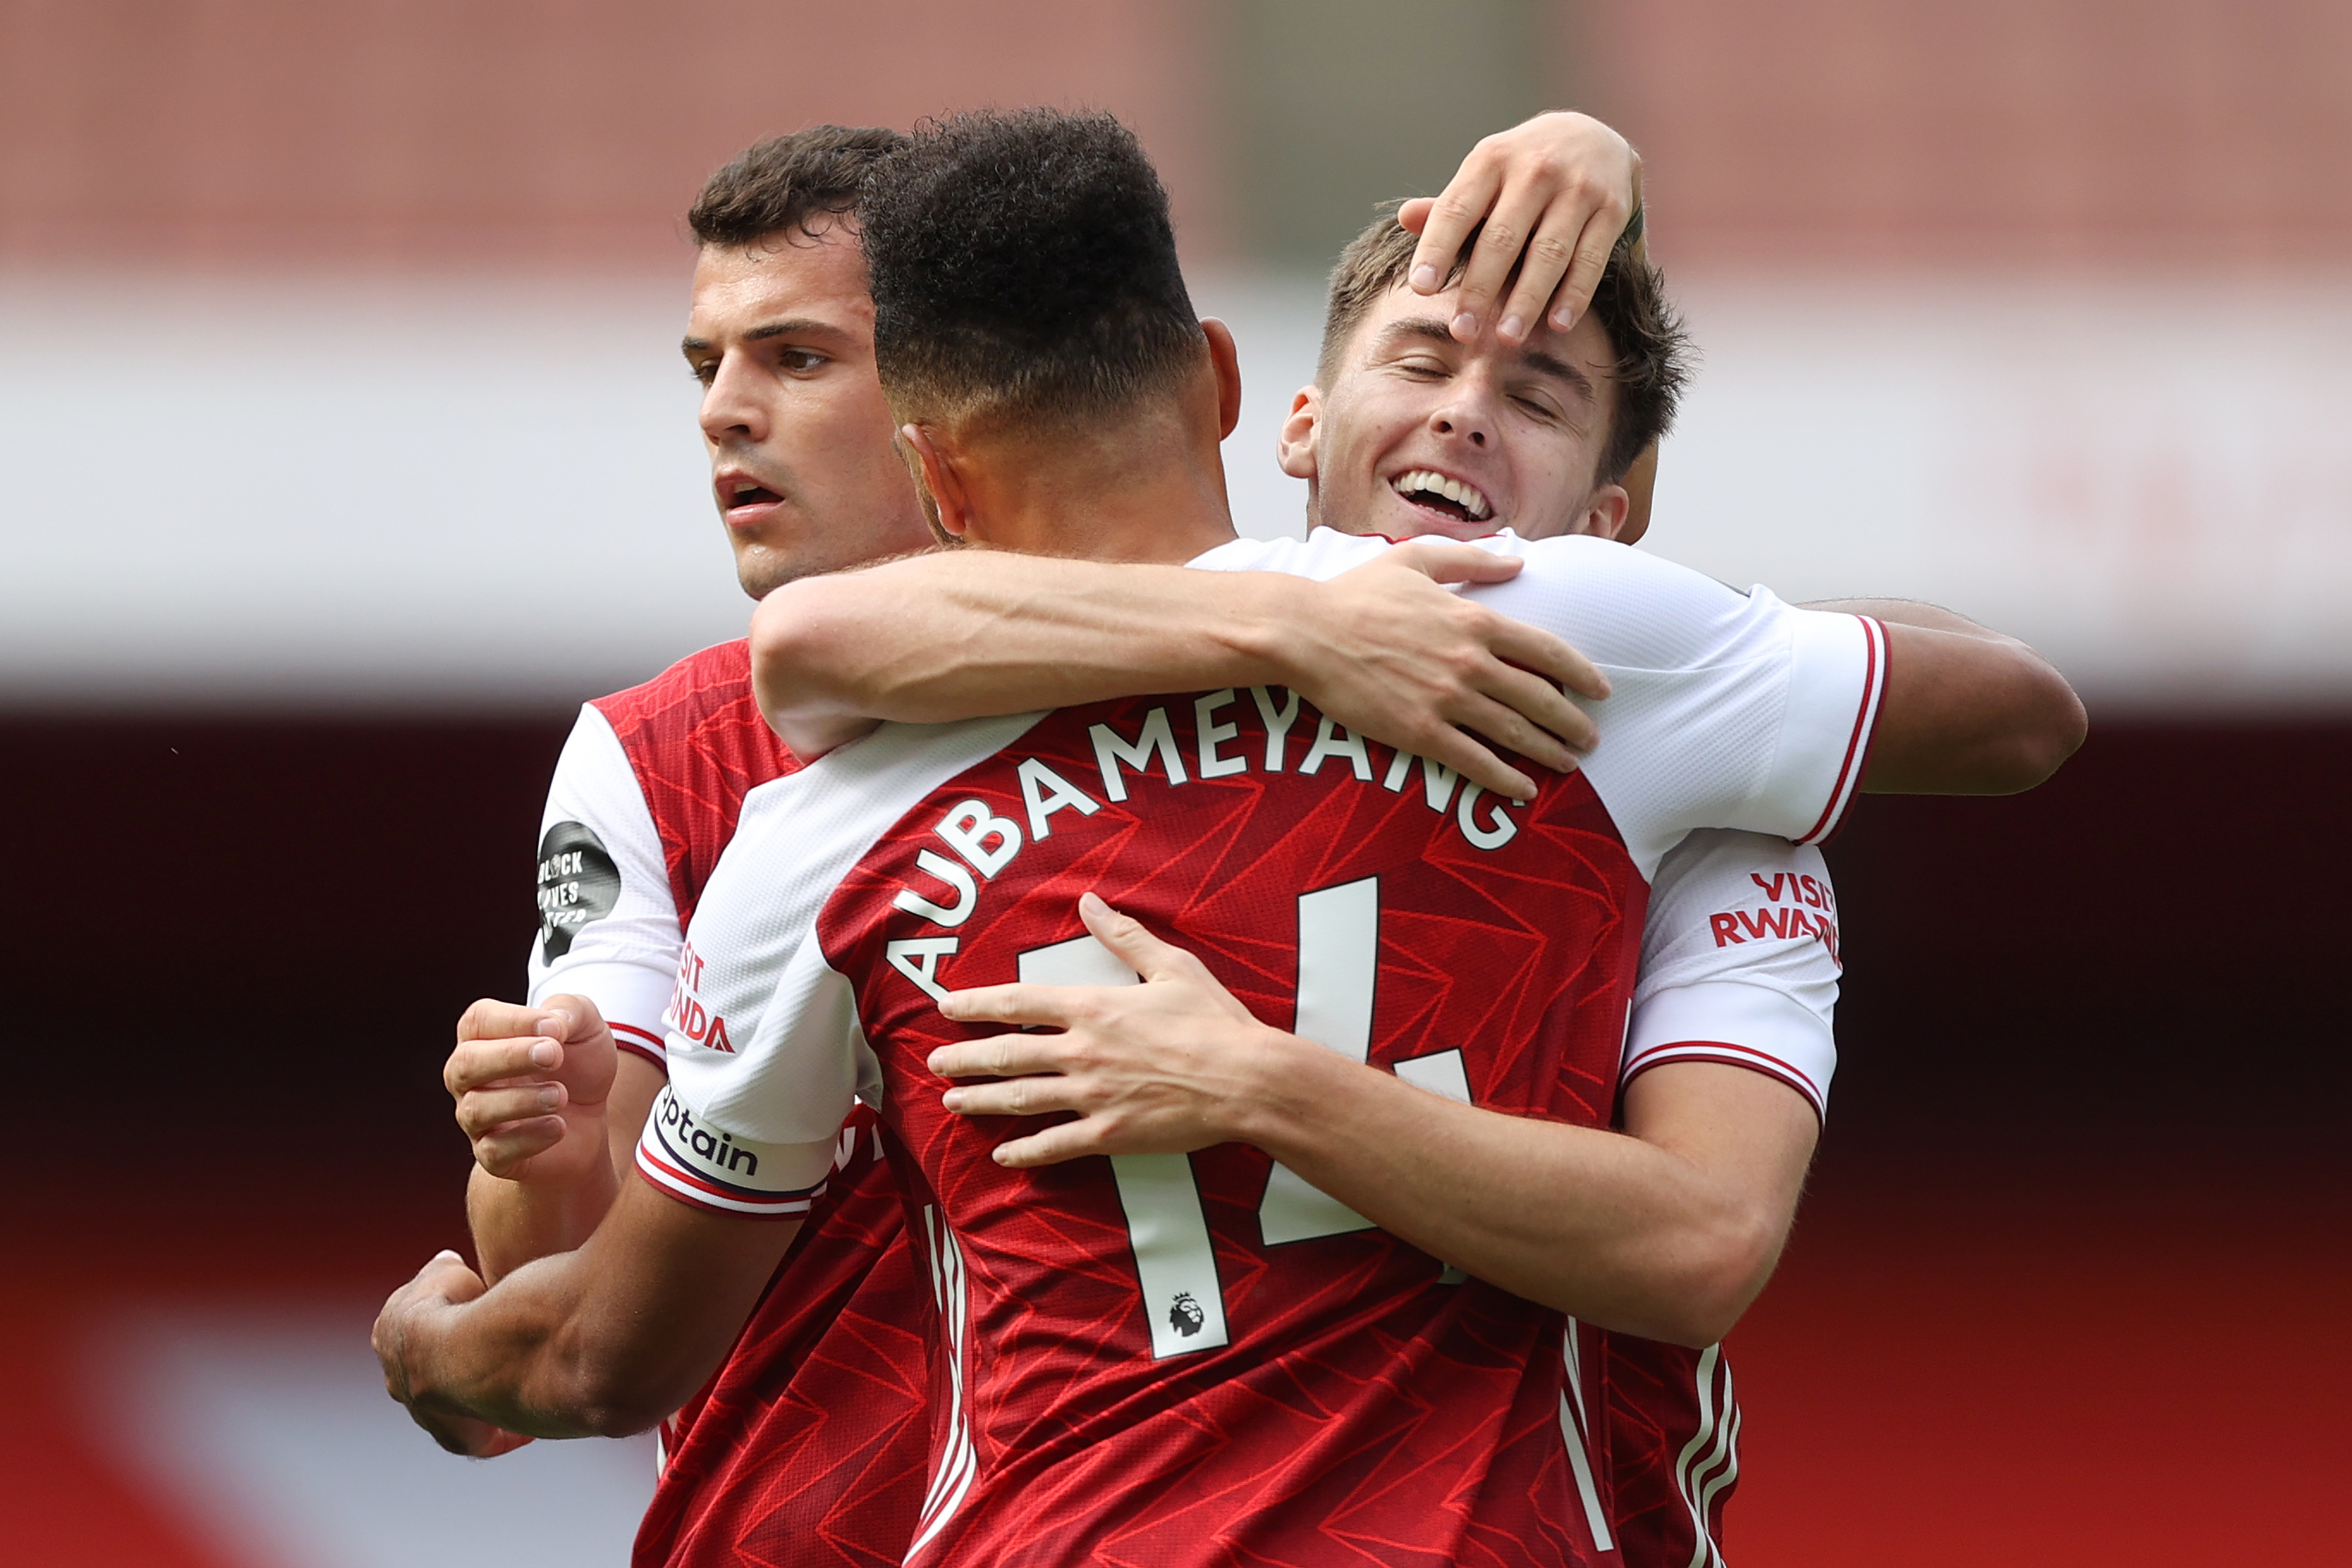 Fulham vs Arsenal LIVE! Premier League updates, live score and commentary stream